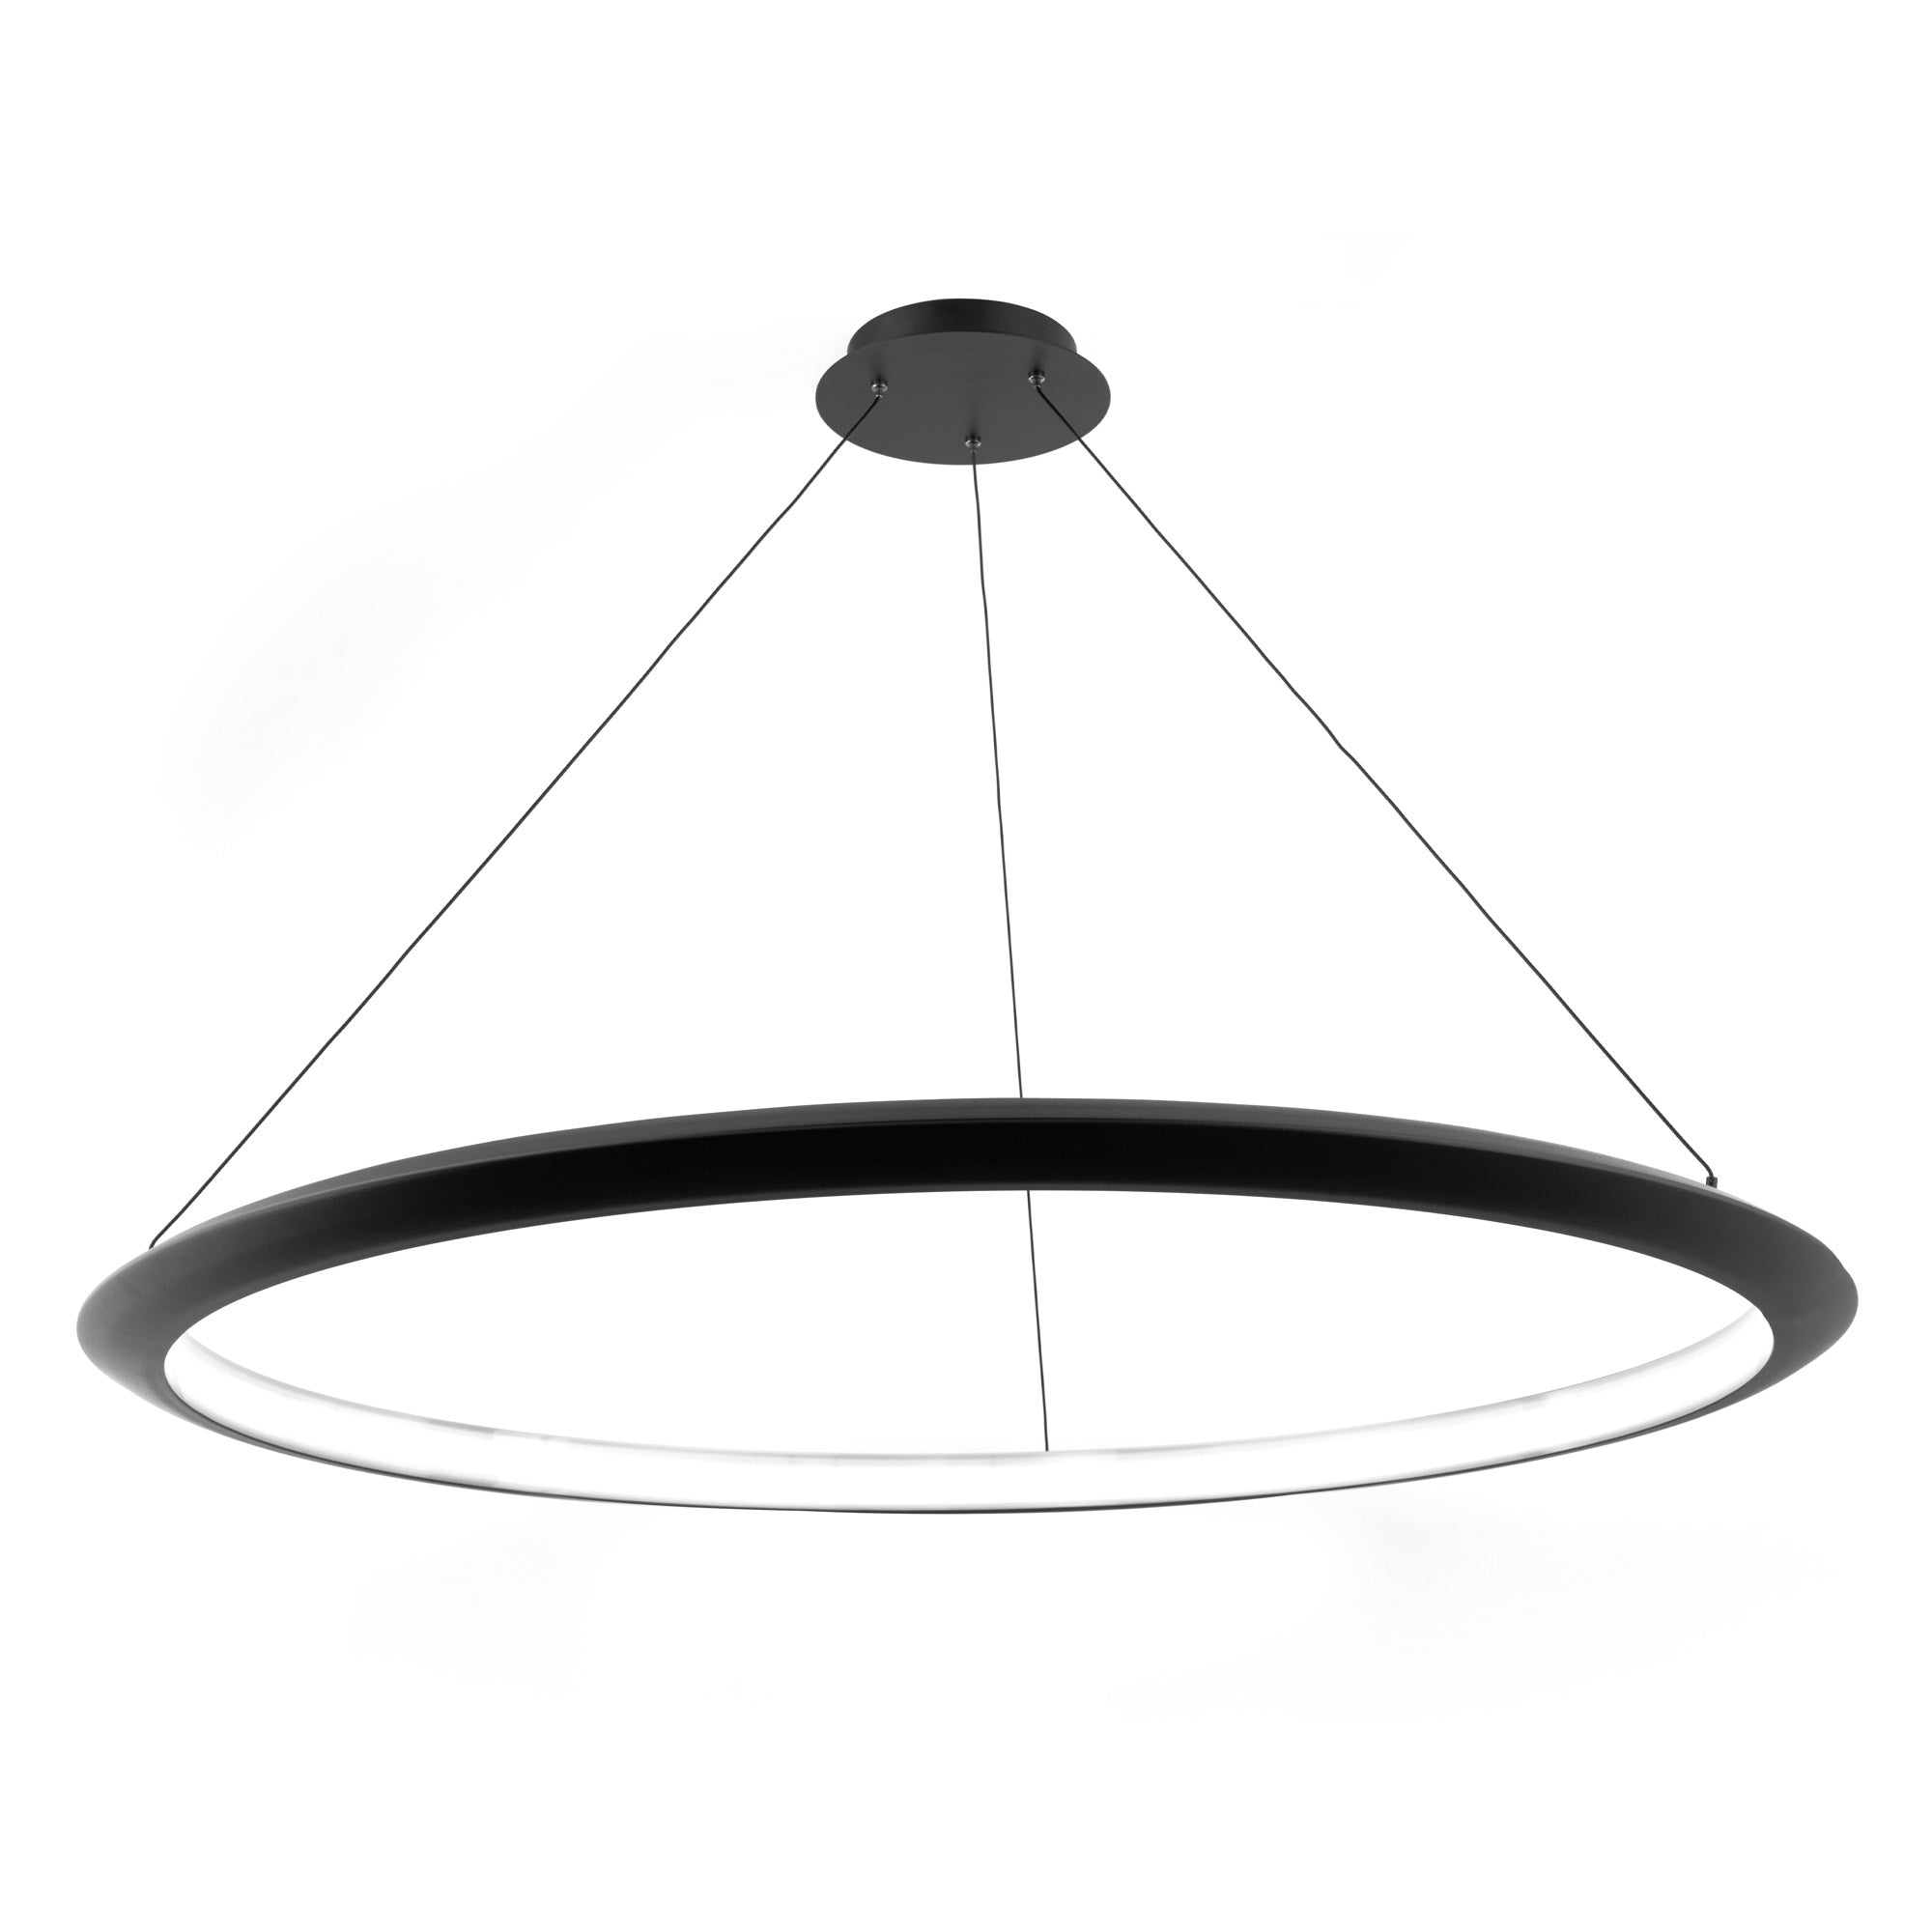 THE RING Chandelier Black INTEGRATED LED - PD-55048-30-BK | MODERN FORMS